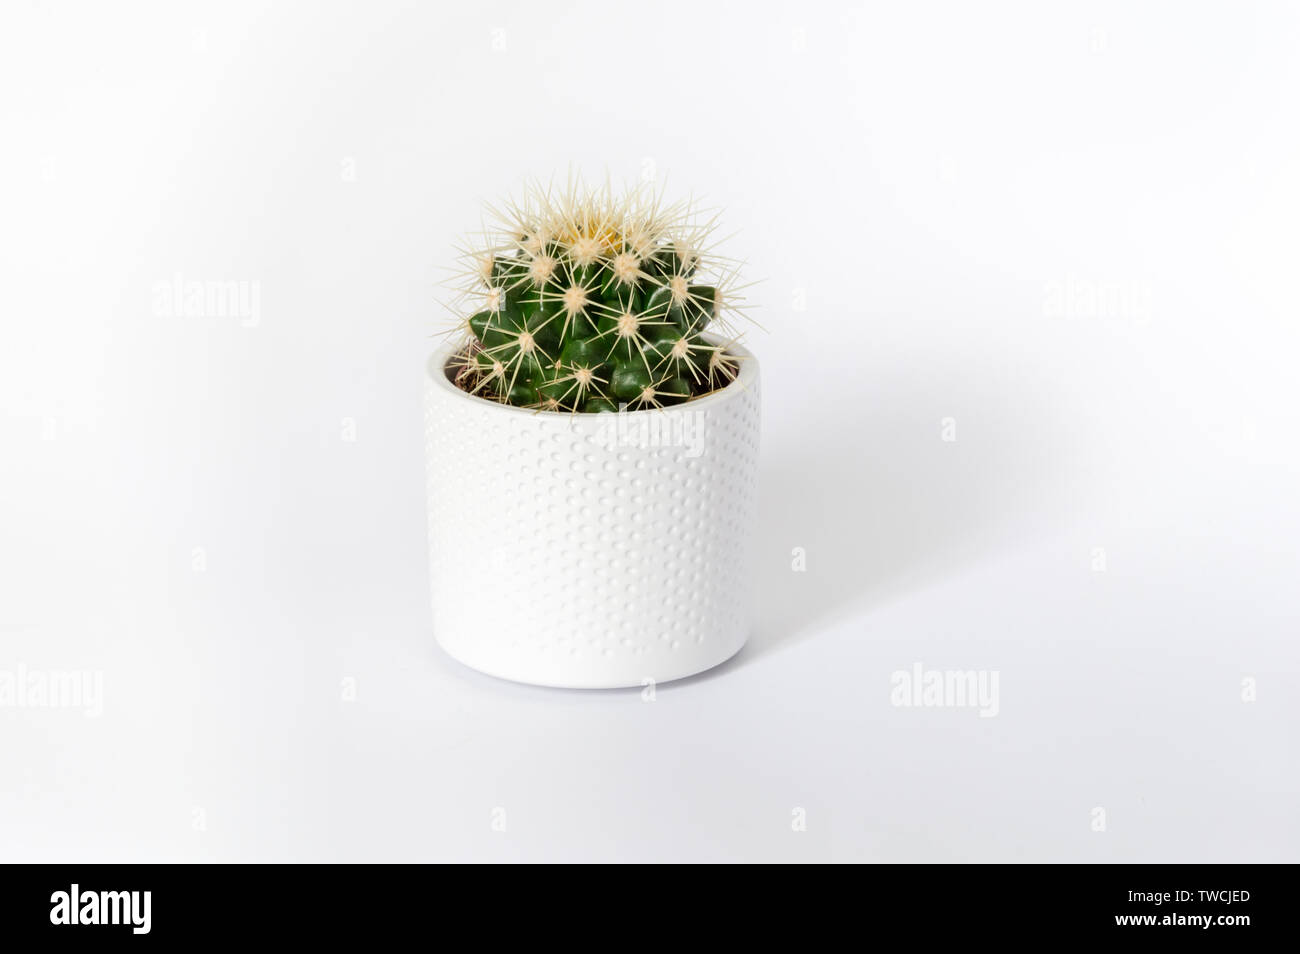 Golden barrel cactus with yellow spikes in white pot isolated on white background. Minimalistic concept Stock Photo